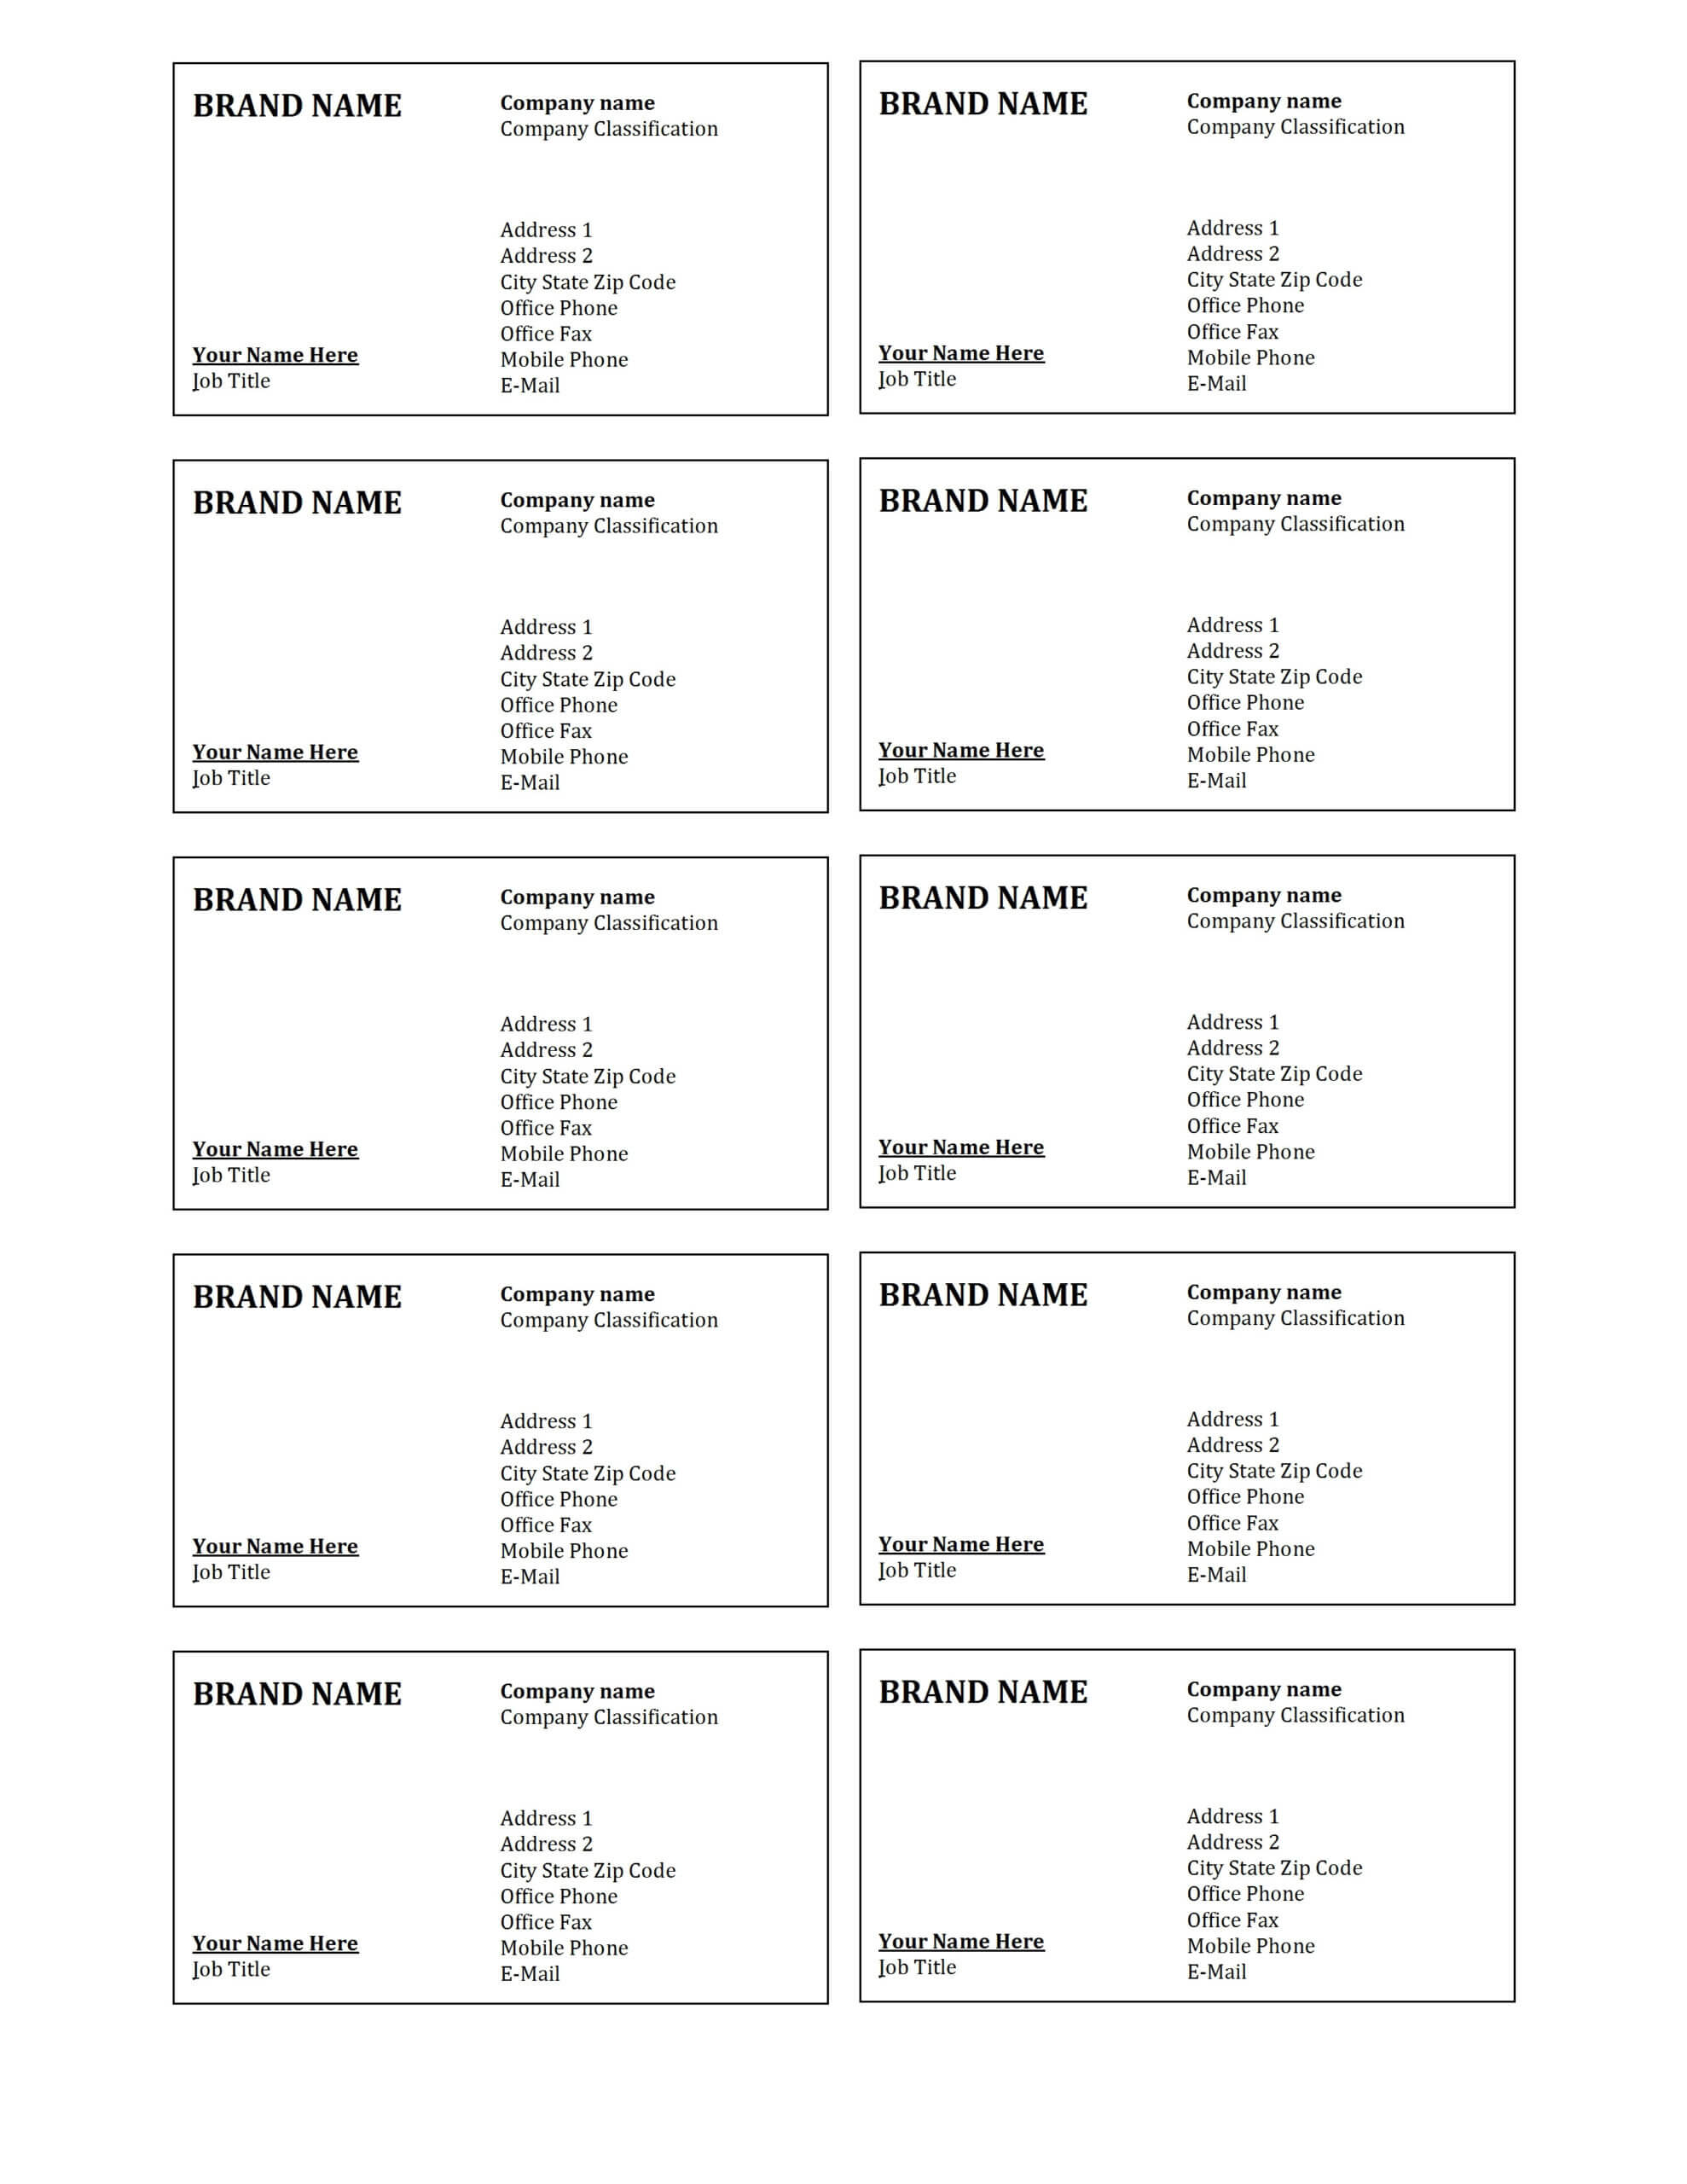 9 Visiting Card Sheet Templates | Fax Cover Sheet Examples For Plain Business Card Template Word